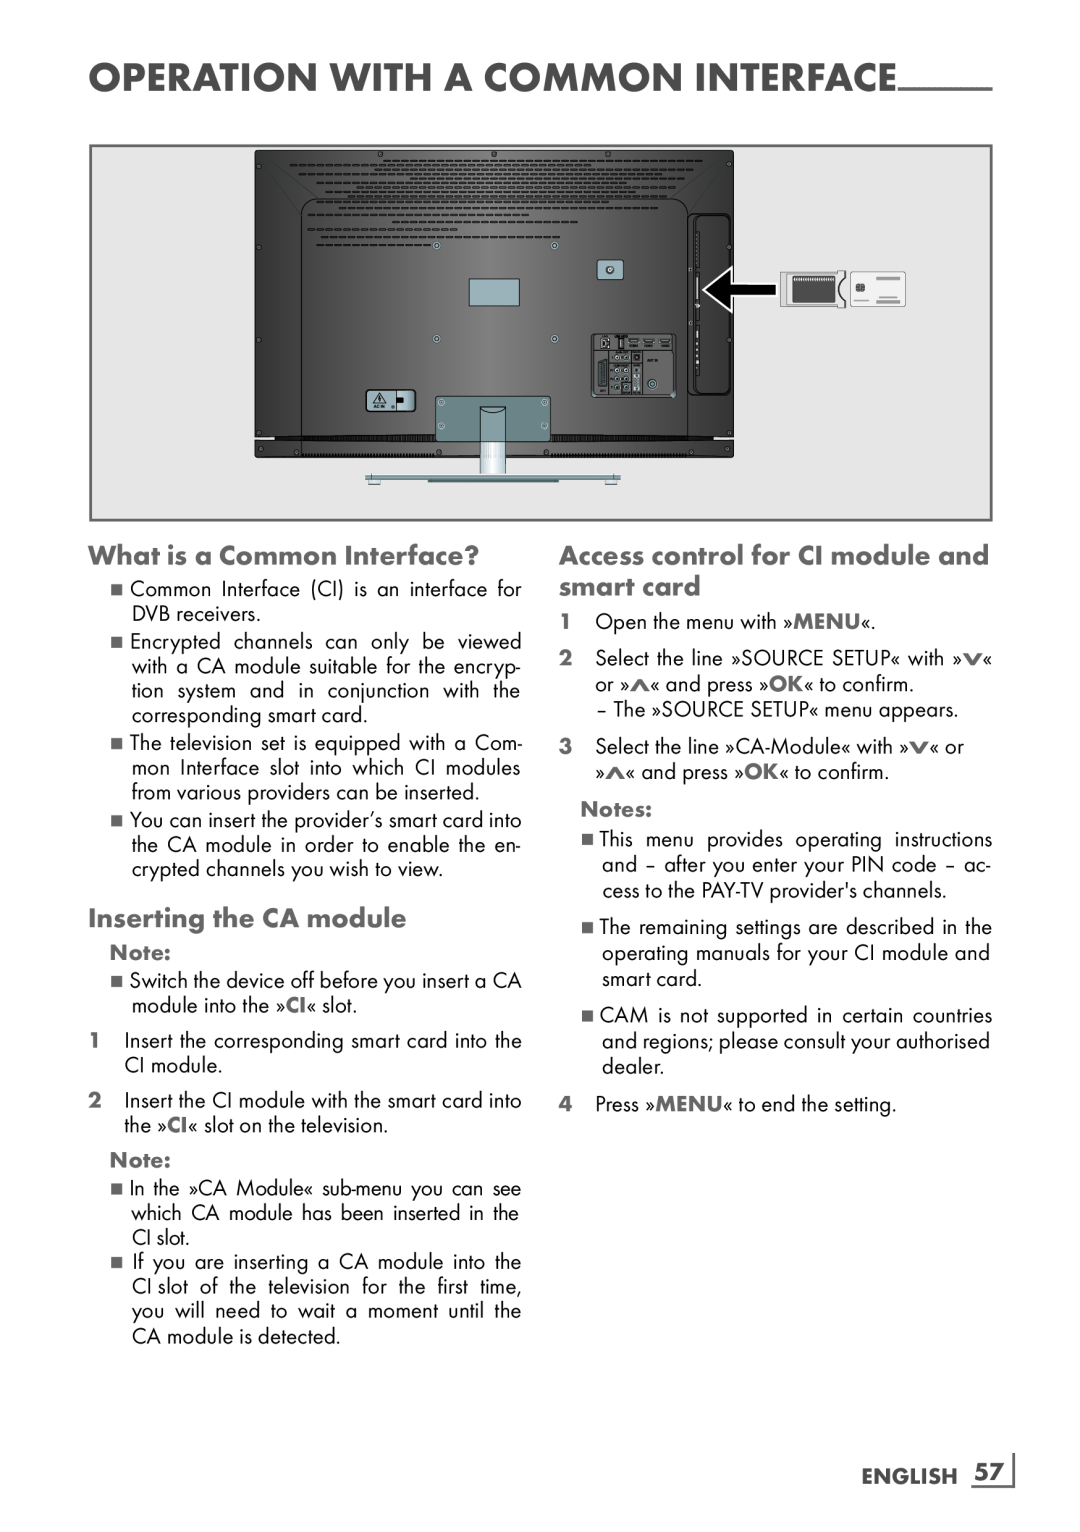 Grundig 40 VLE 8130 BG What is a Common Interface?, Inserting the CA module, Access control for CI module and smart card 